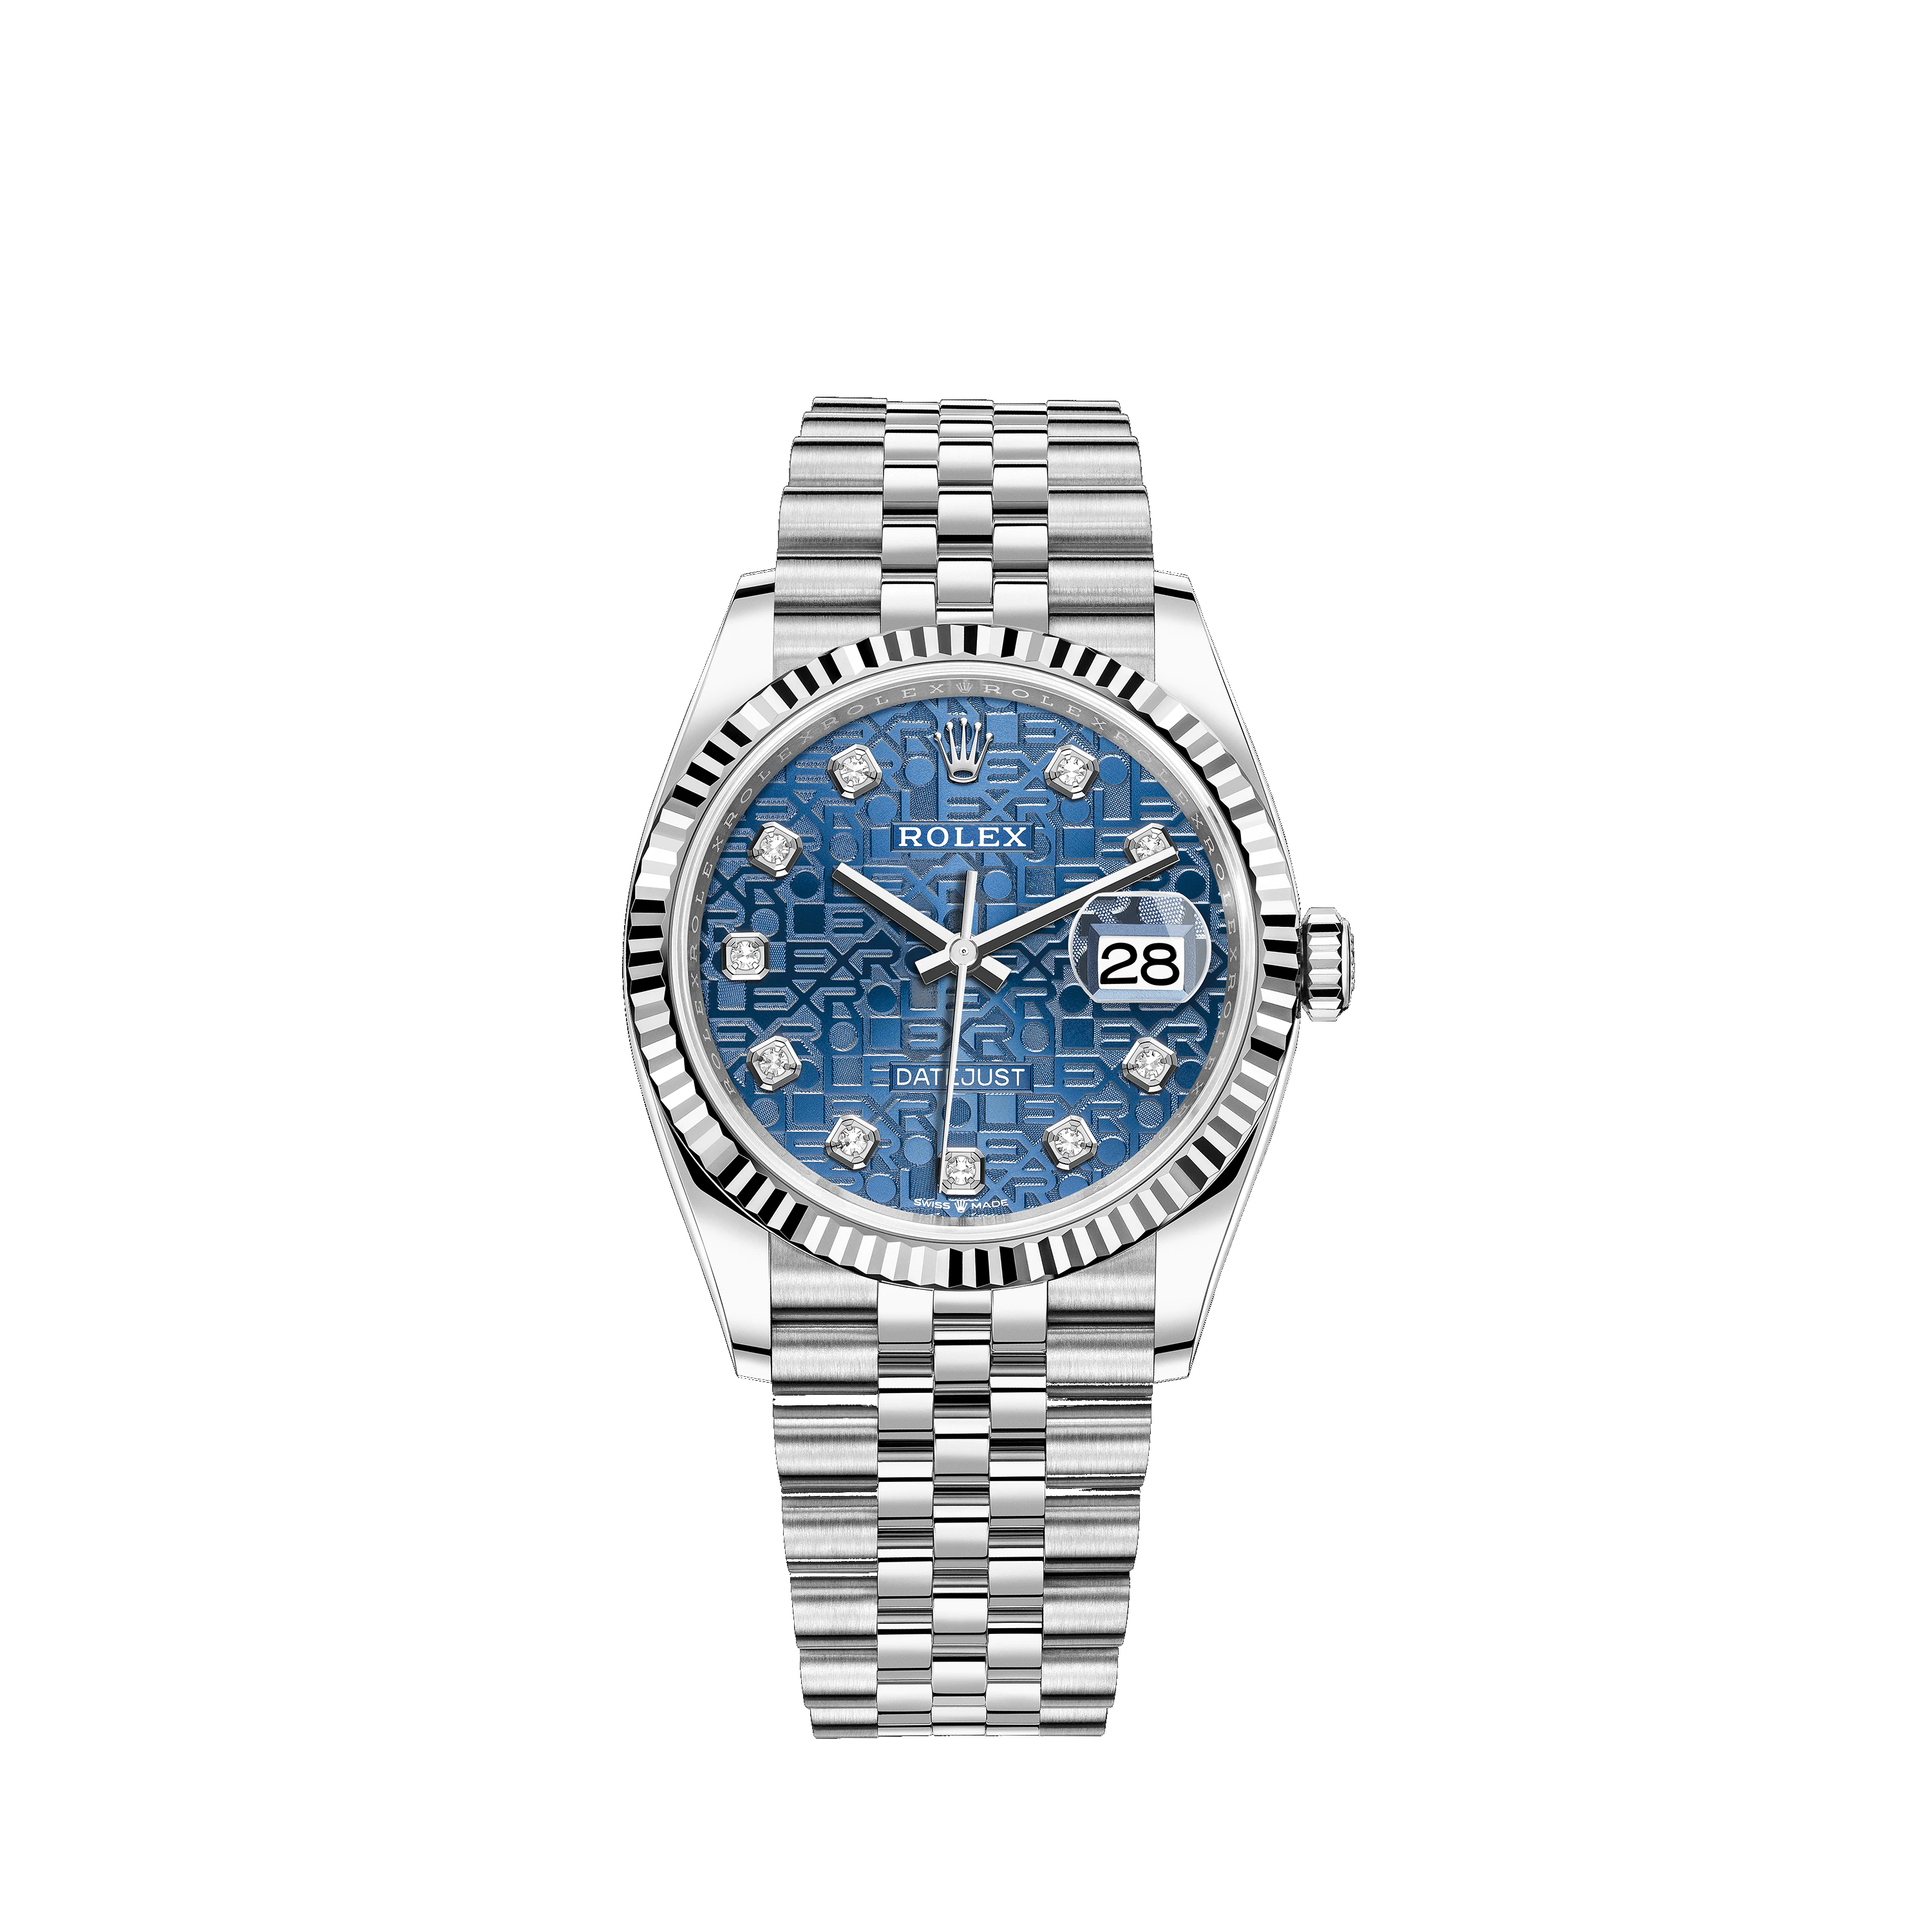 Datejust 36 126234 White Gold & Stainless Steel Watch (Blue Jubilee Design Set with Diamonds)